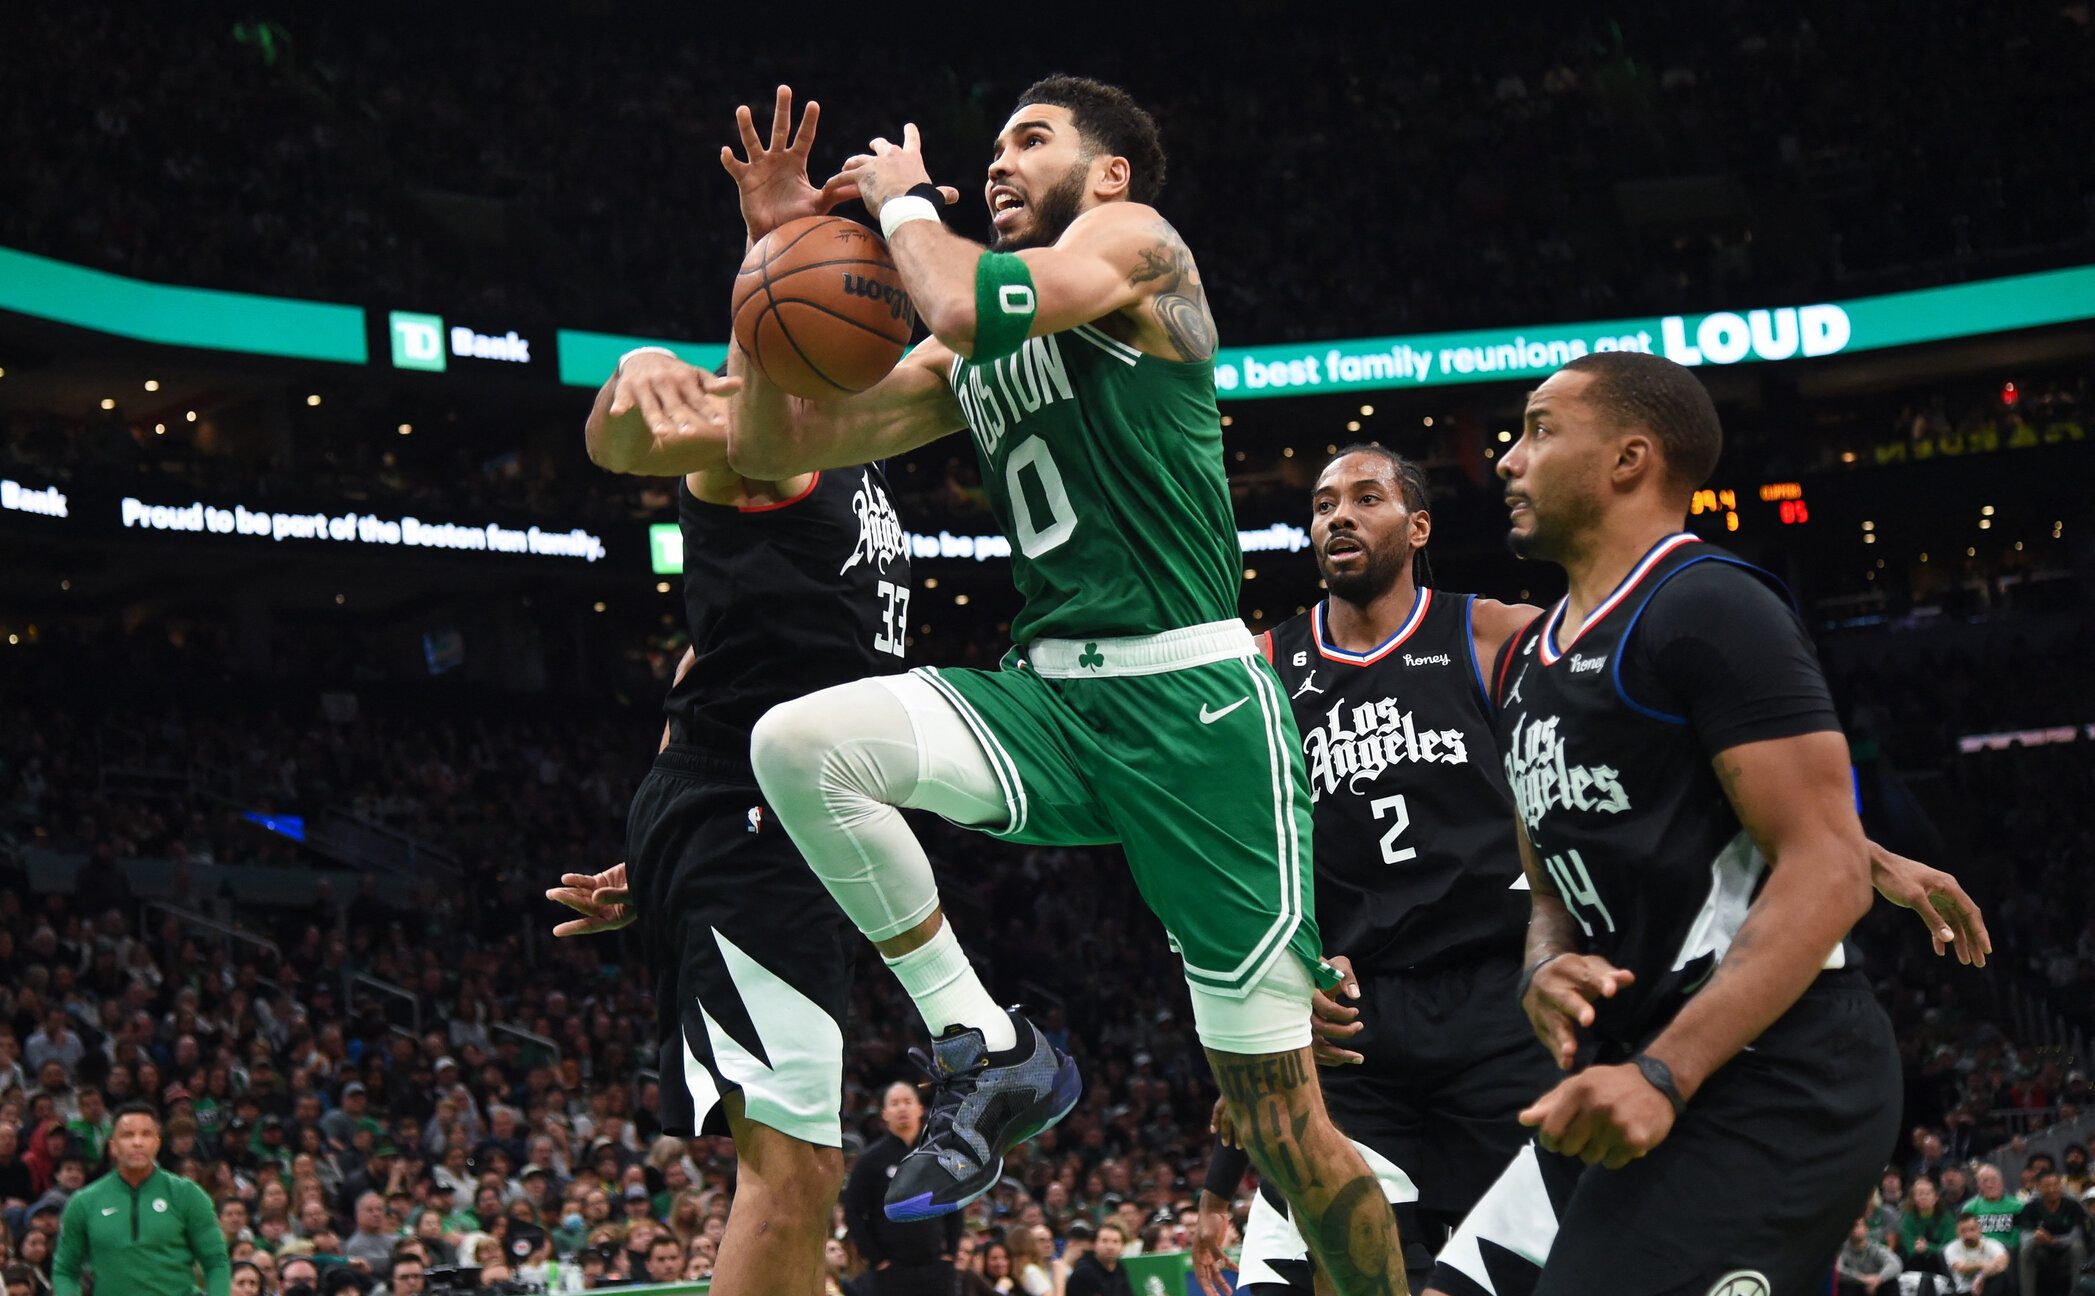 Celtics end home stand on winning note, knock off Clippers